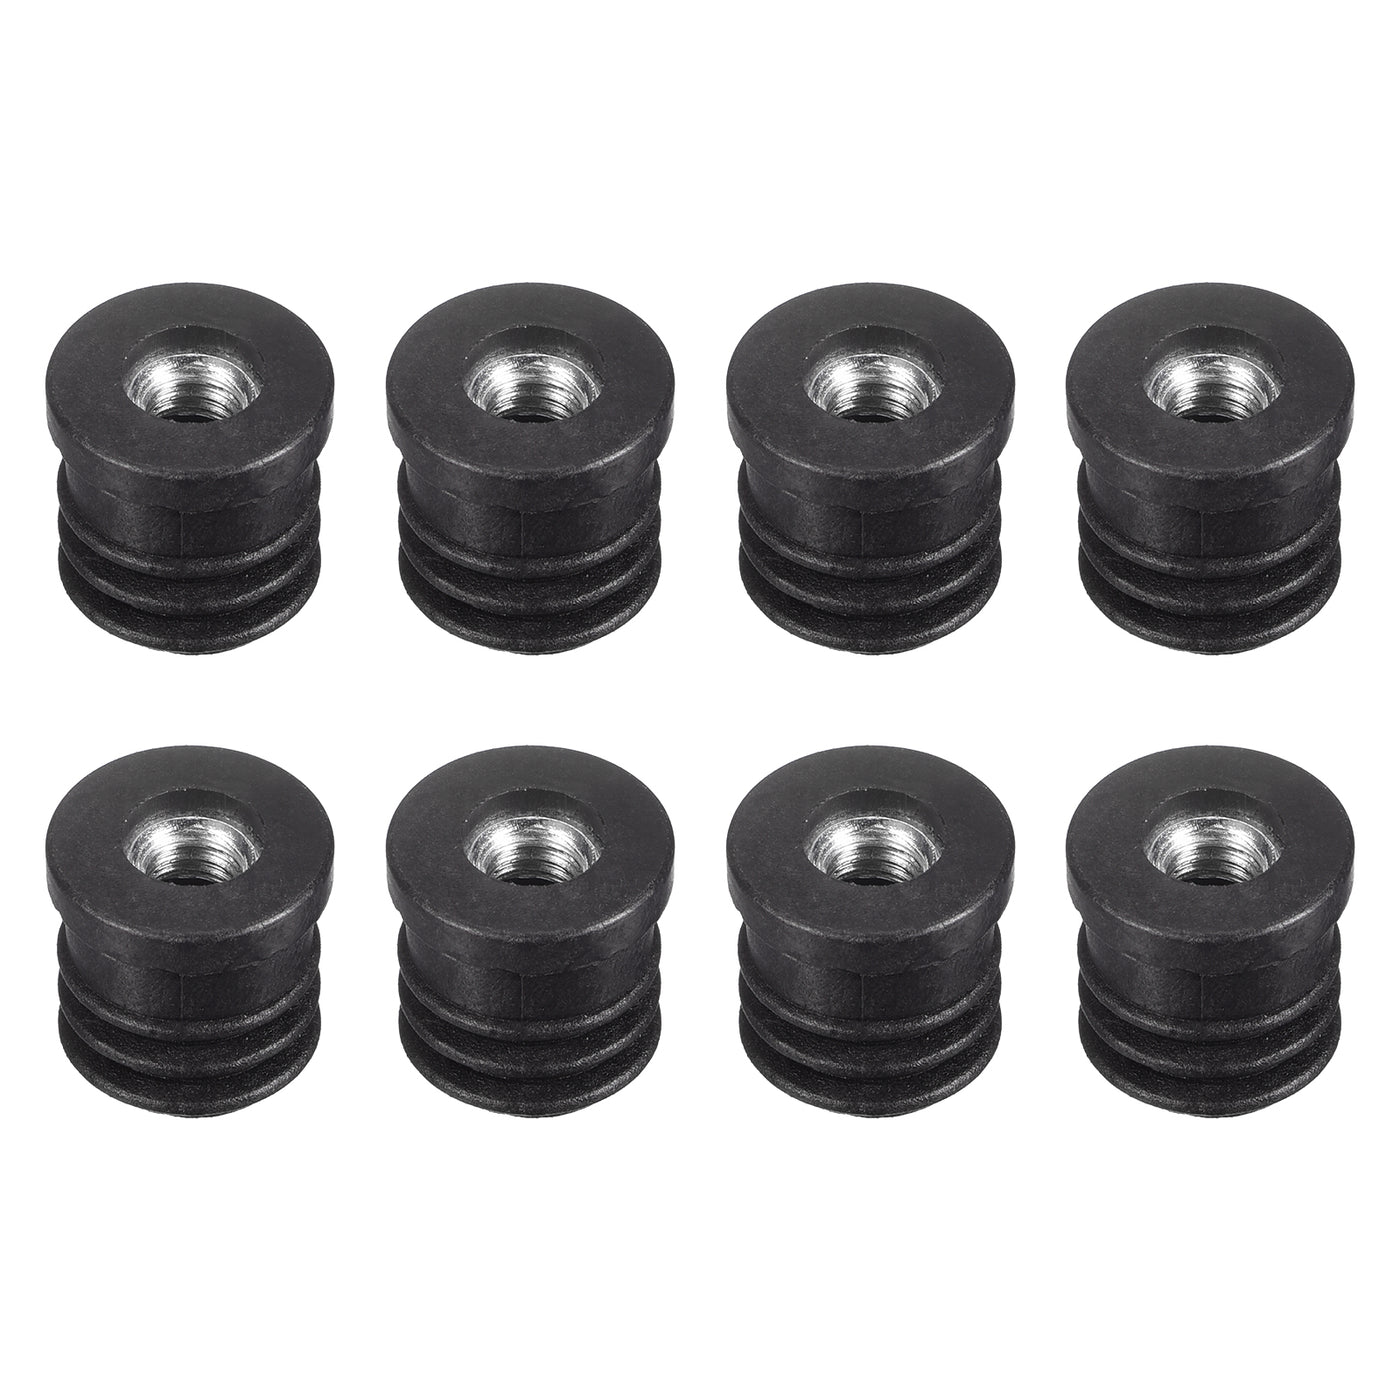 uxcell Uxcell 8Pcs 16mm/0.63" Caster Insert with Thread, Round M6 Thread for Furniture